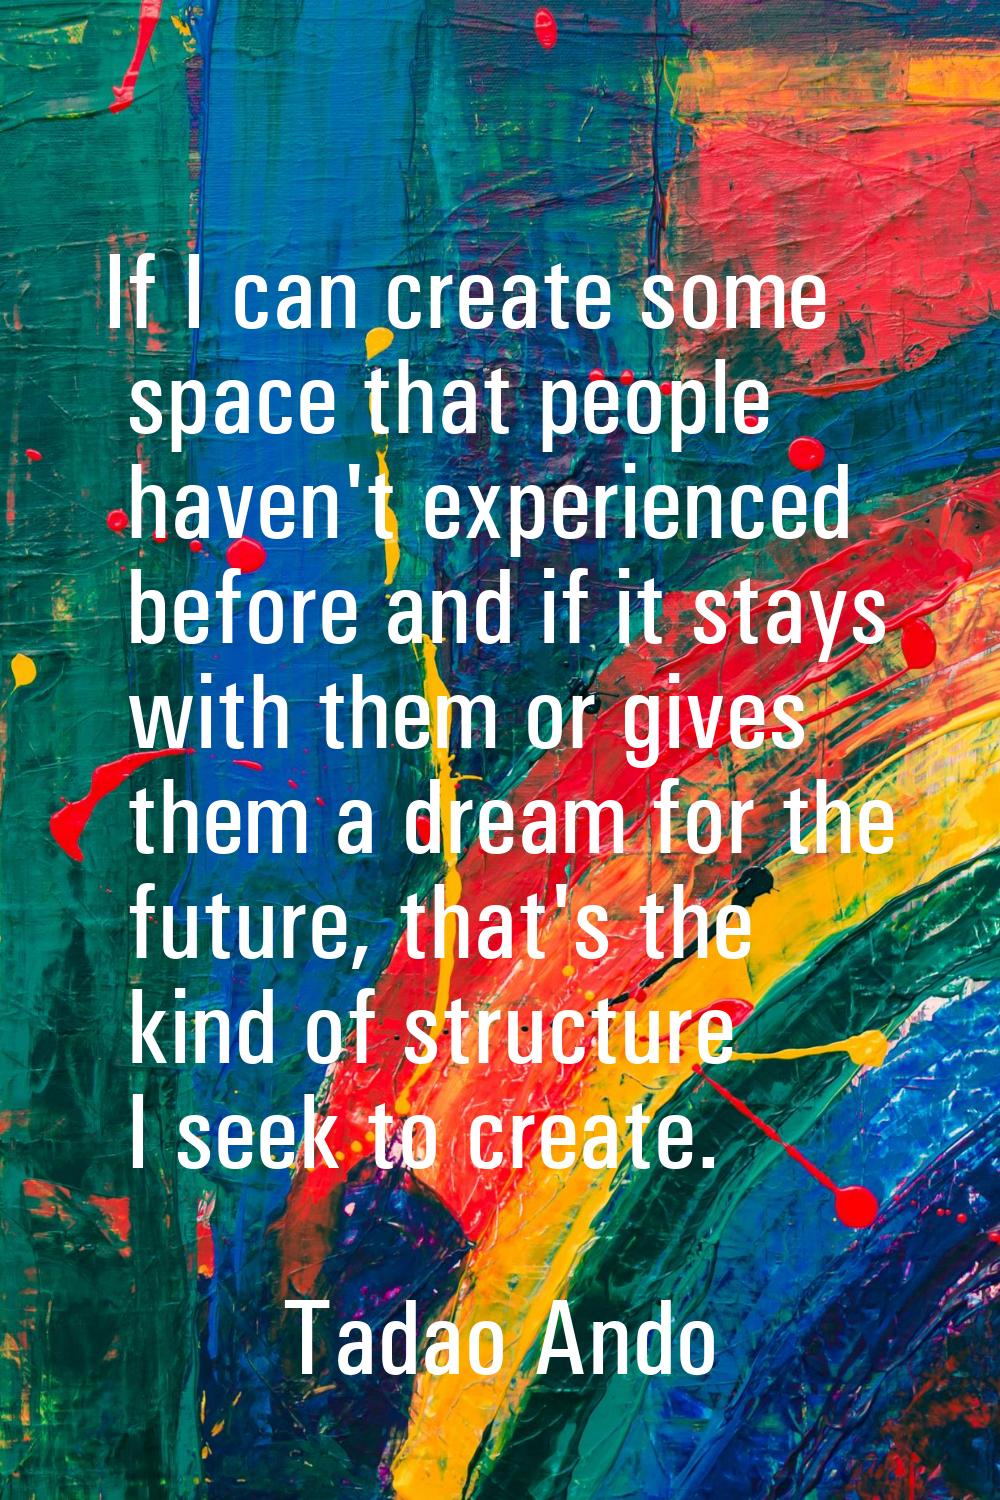 If I can create some space that people haven't experienced before and if it stays with them or give